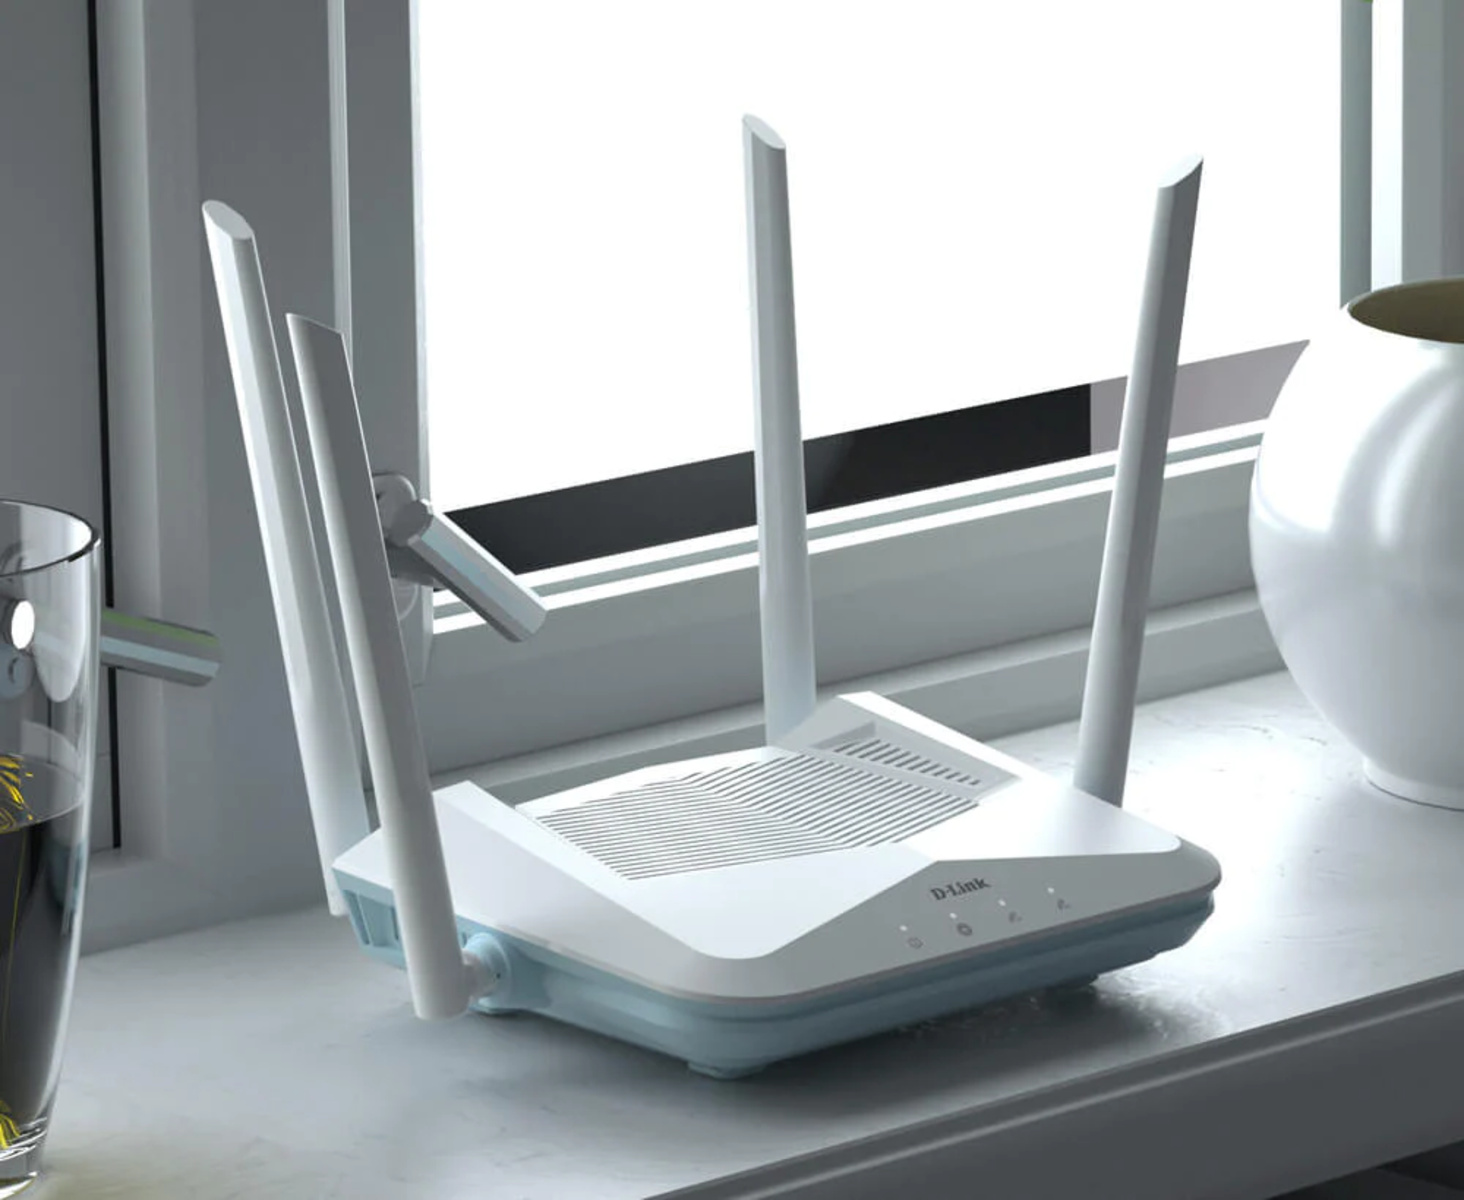 How To Fix A Dlink Wireless Router